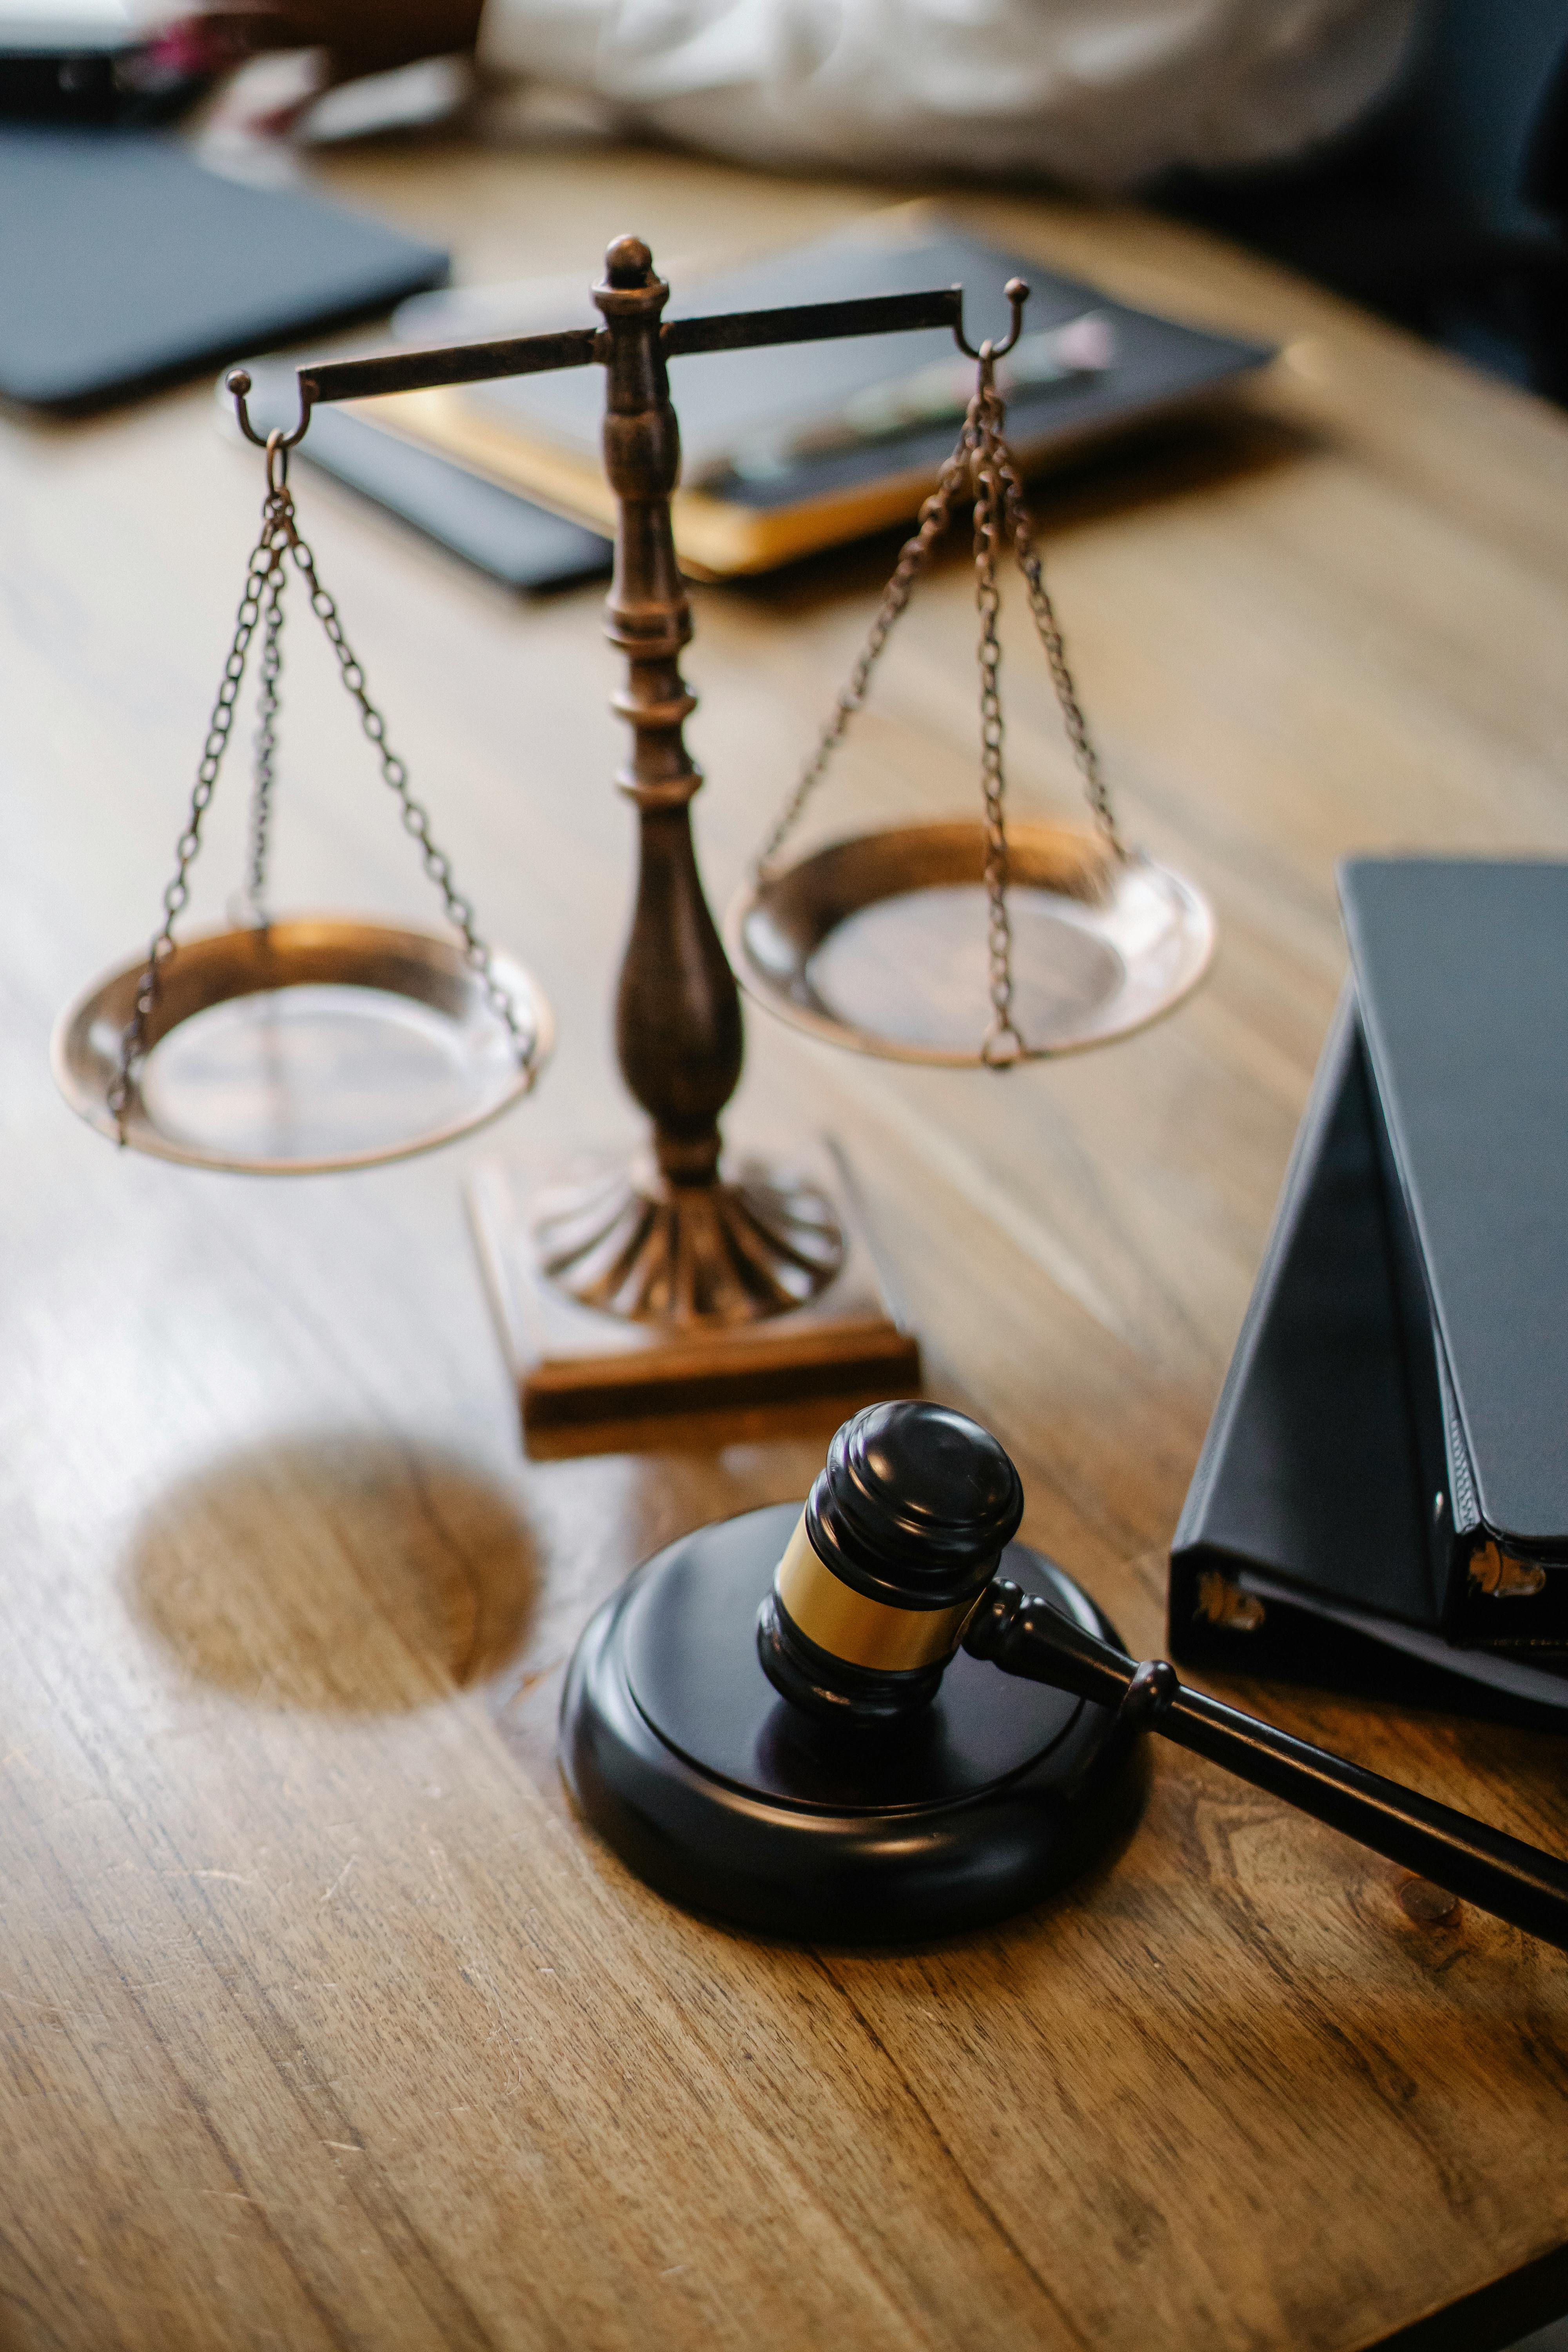 A justice scale and judge's hammer | Source: Pexels